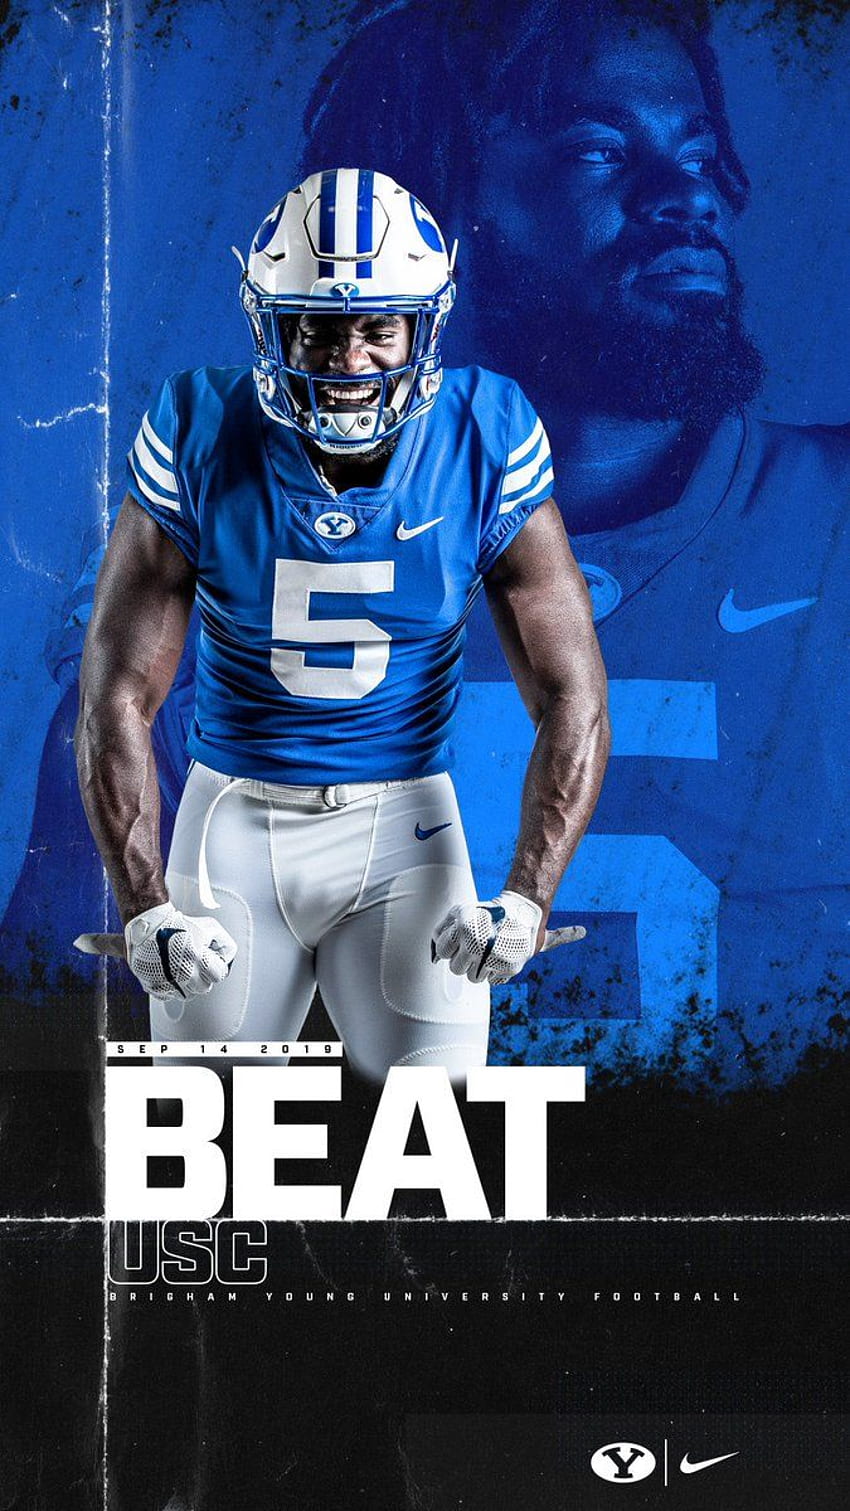 BYU FOOTBALL on Twitter 𝐍𝐄𝐖 𝐖𝐀𝐋𝐋𝐏𝐀𝐏𝐄𝐑𝐒 check out this weeks  wallpapers  BYUFOOTBALL  kslsports httpstco6KGnDVuXpE  X